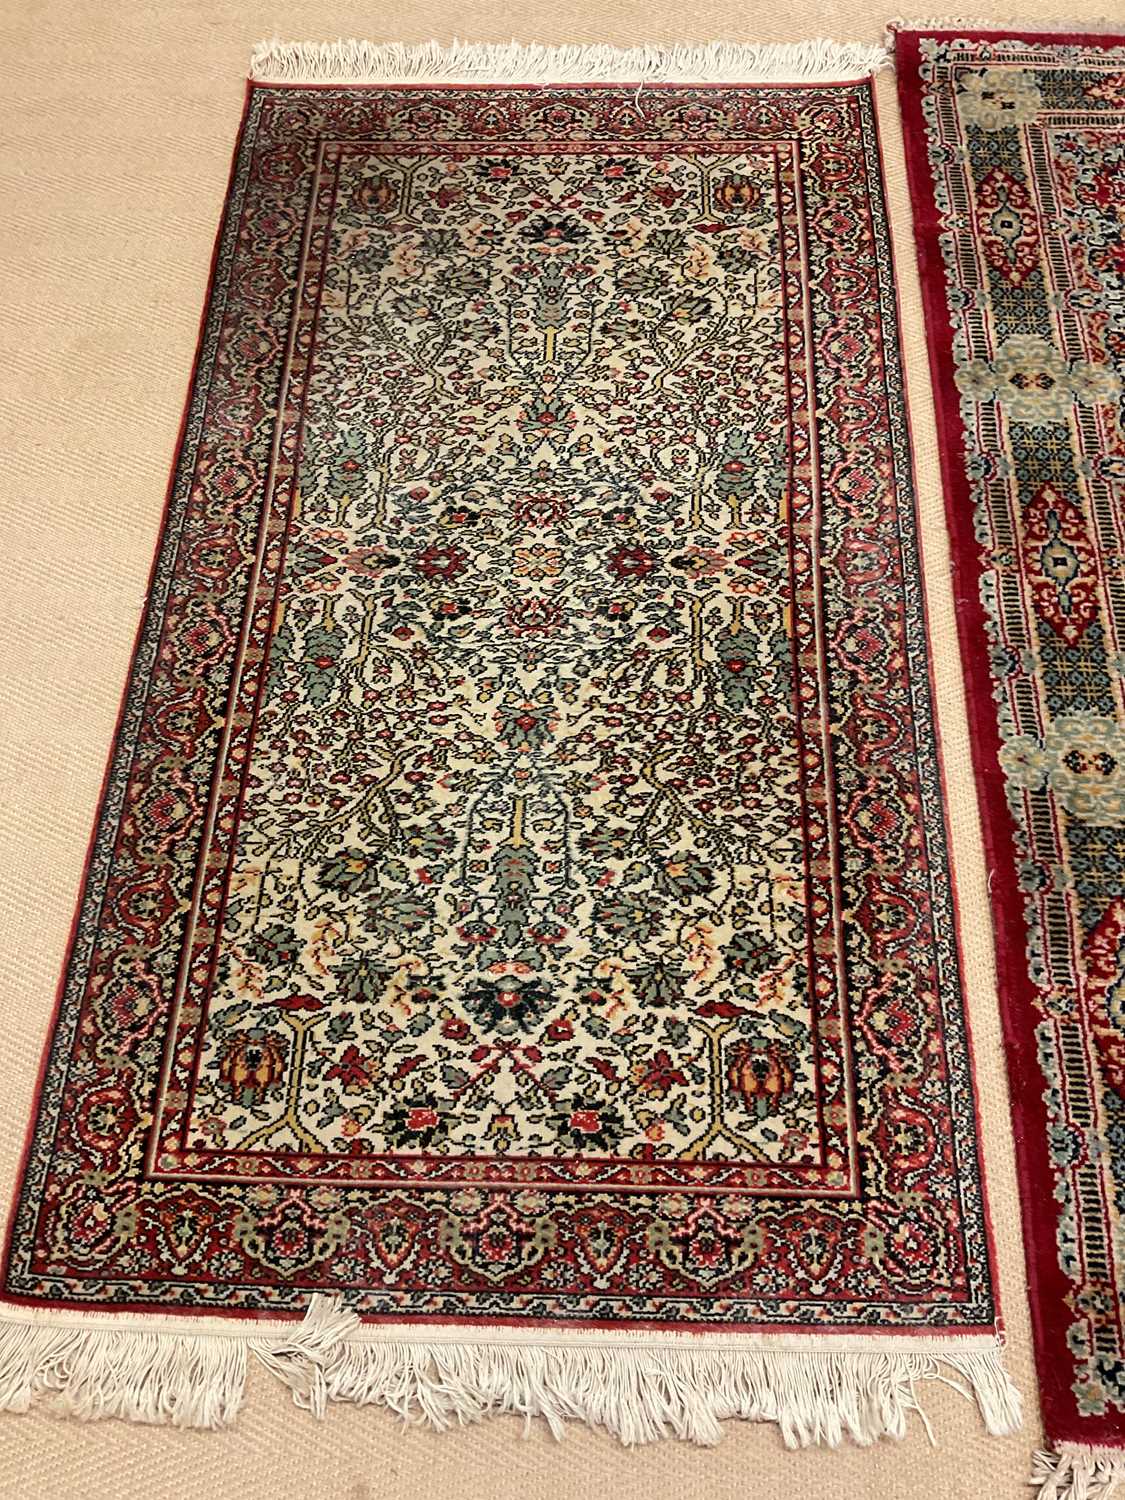 Two vintage Eastern rugs, one a dark red rug with central medallion and decorative border, 122 x - Image 2 of 6